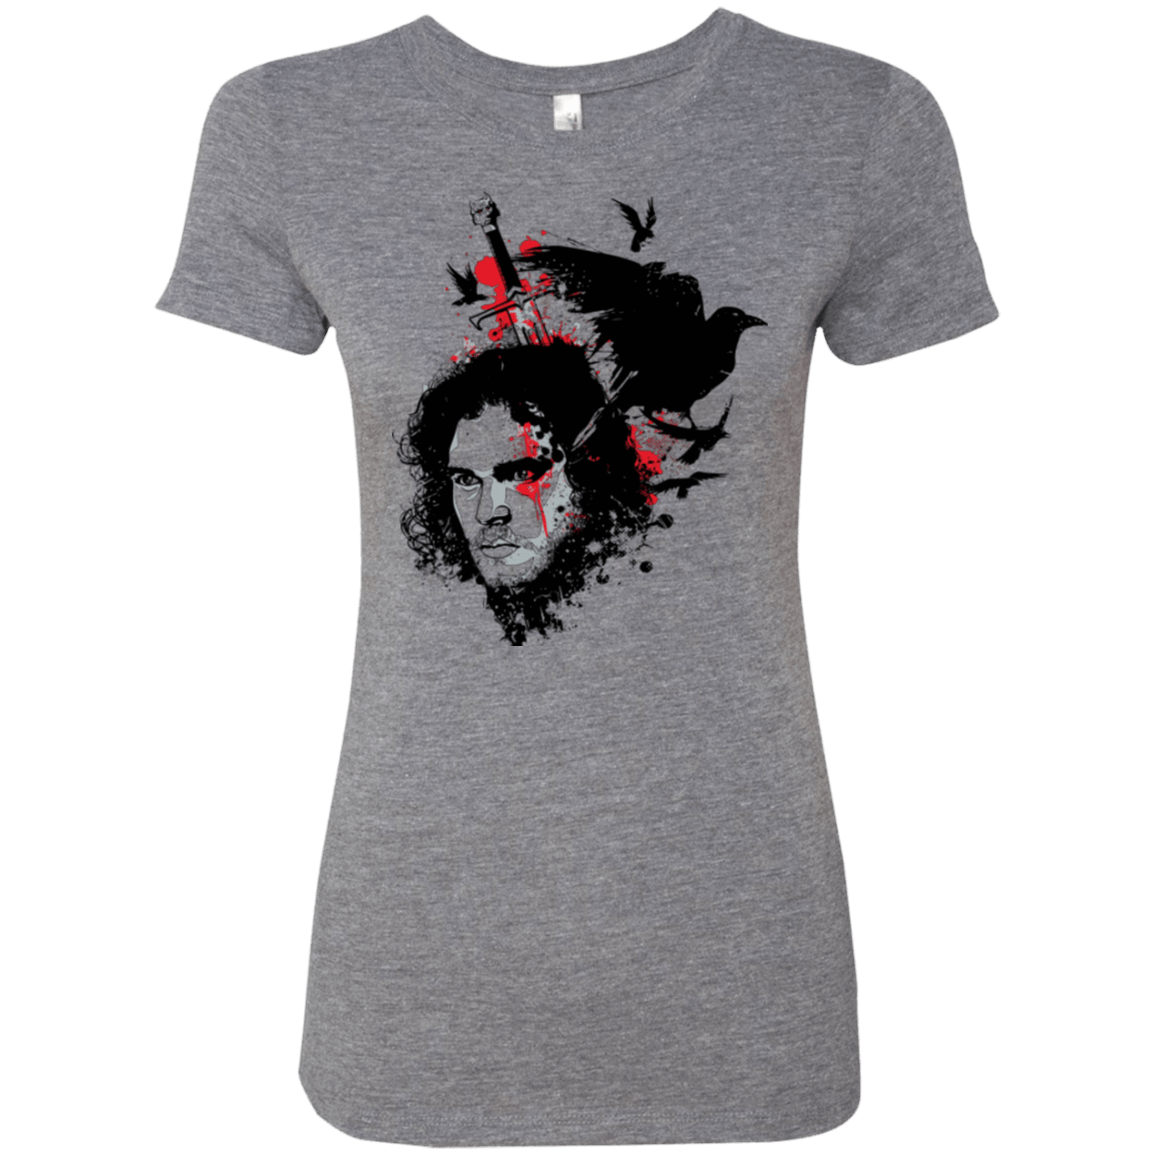 T-Shirts Premium Heather / Small KING IN THE NORTH Women's Triblend T-Shirt